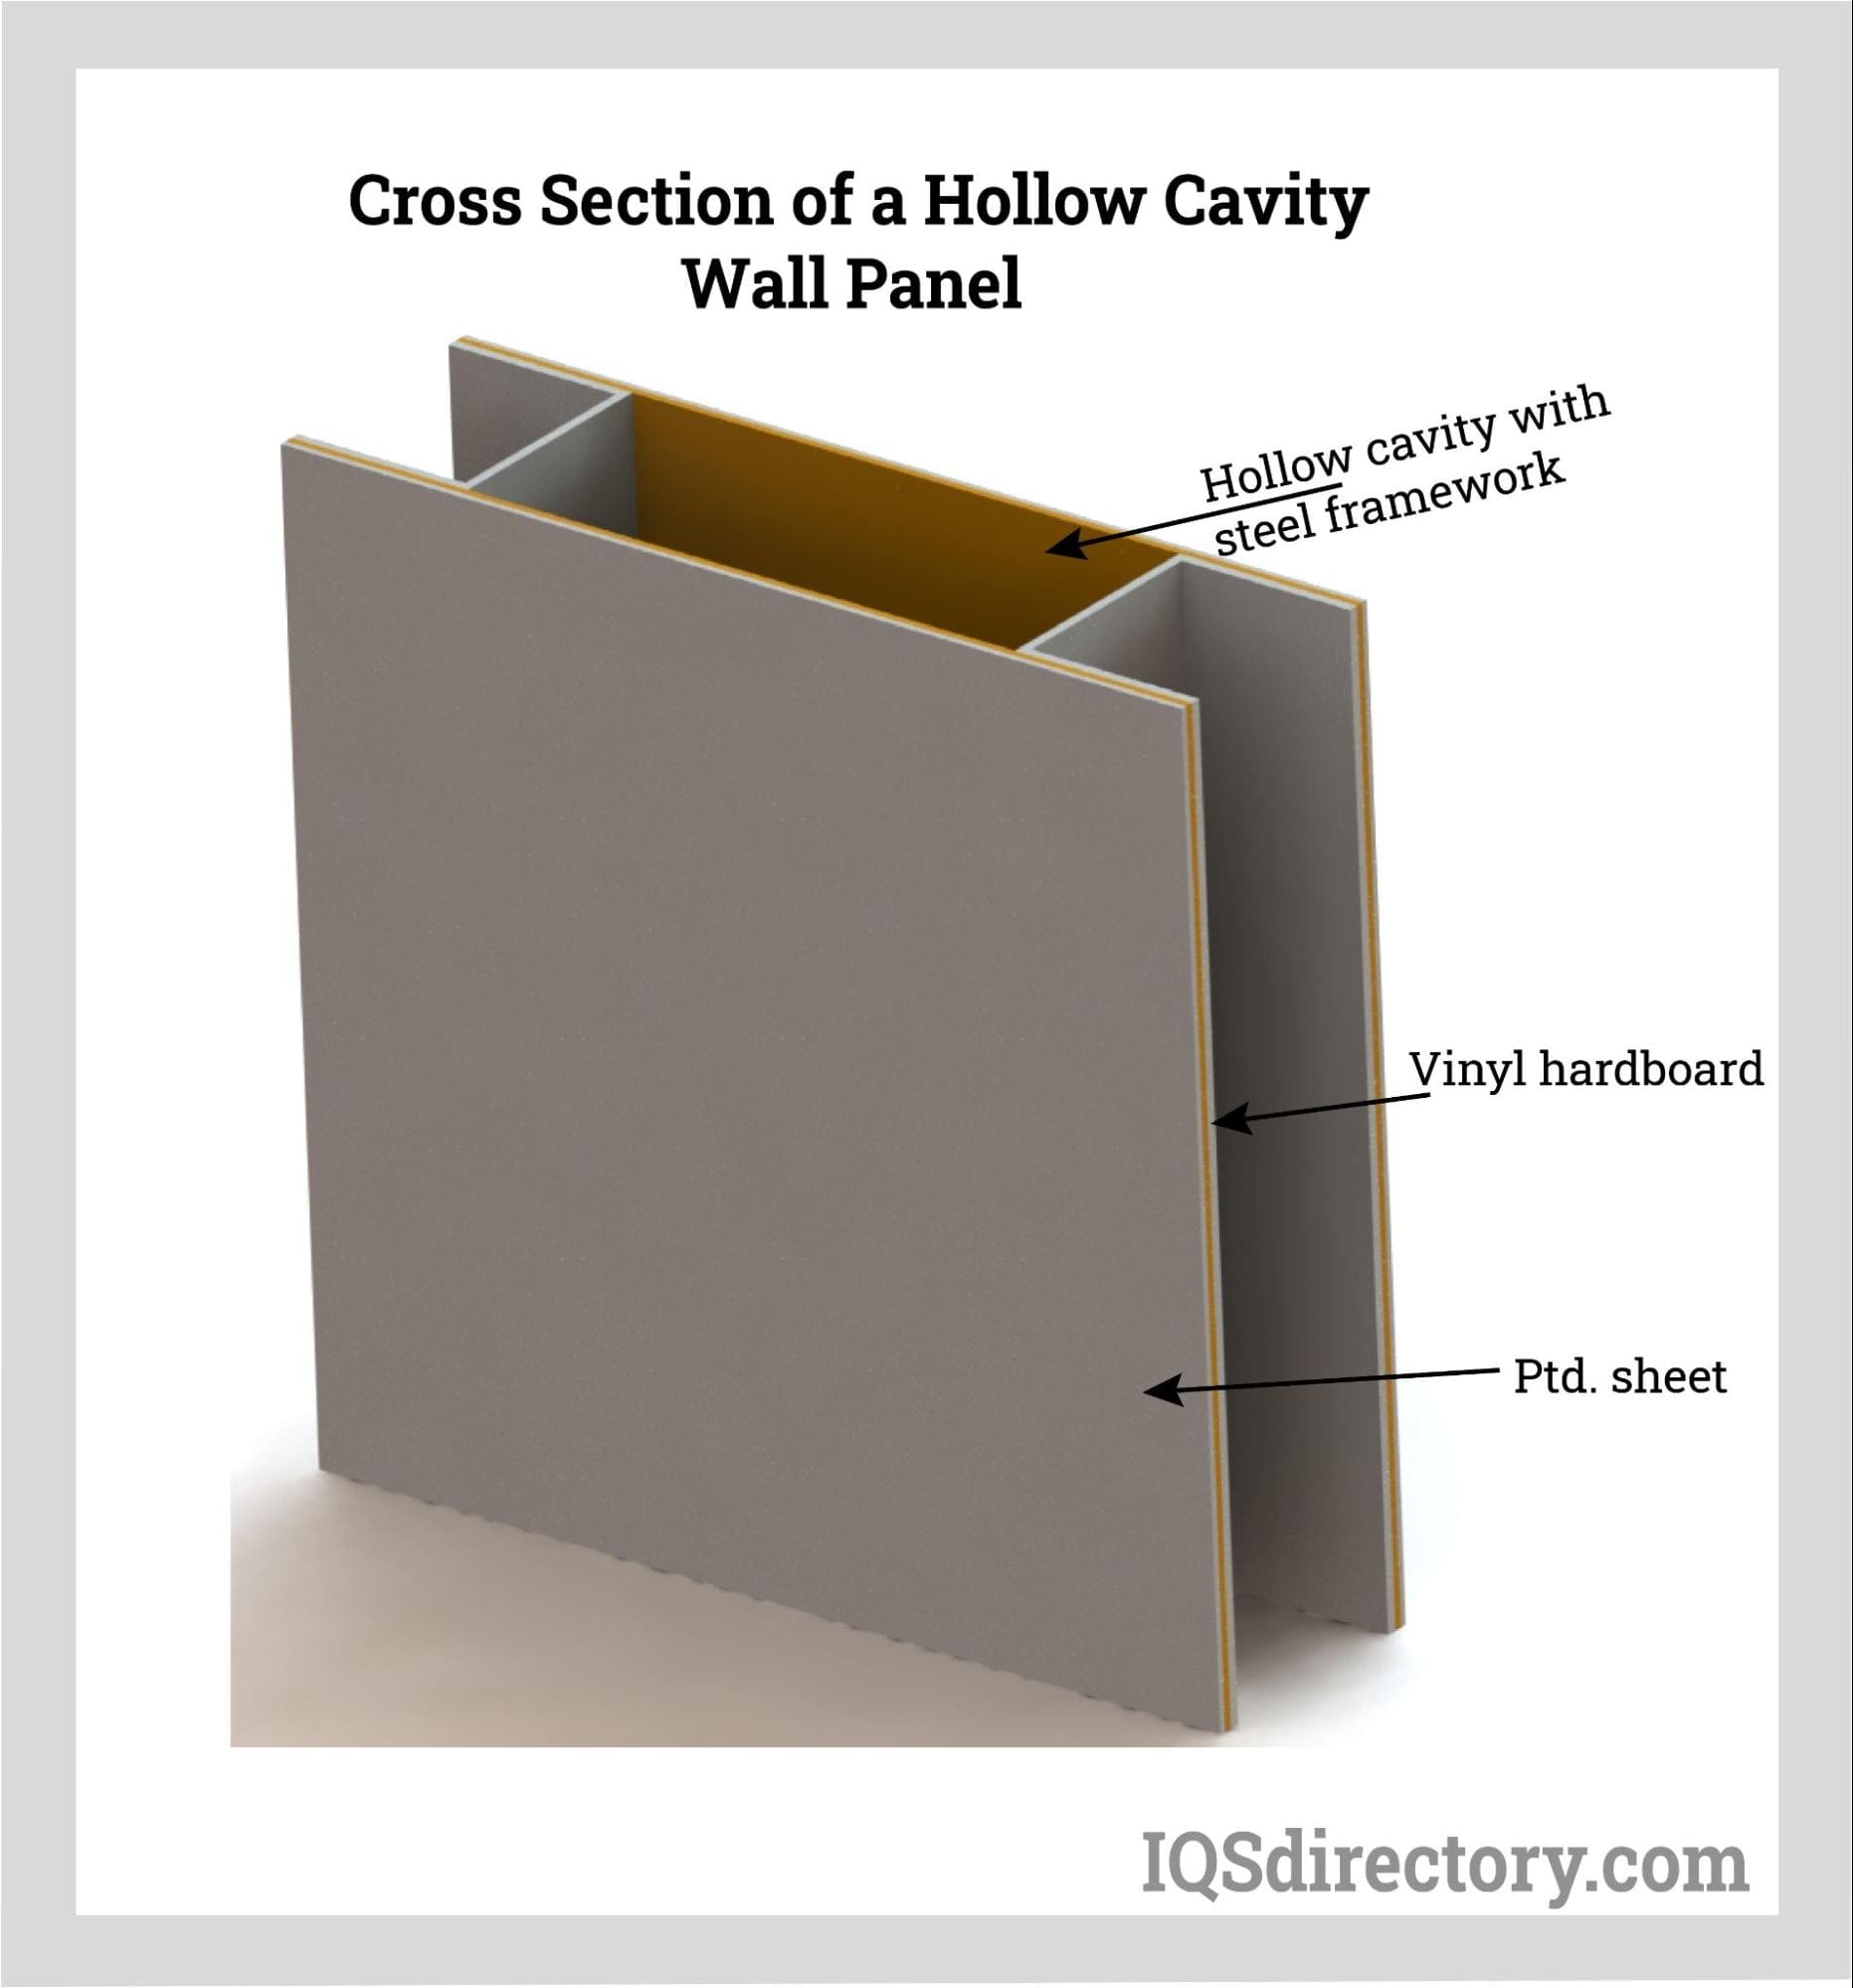 Cross Section of a Hollow Cavity Wall Panel